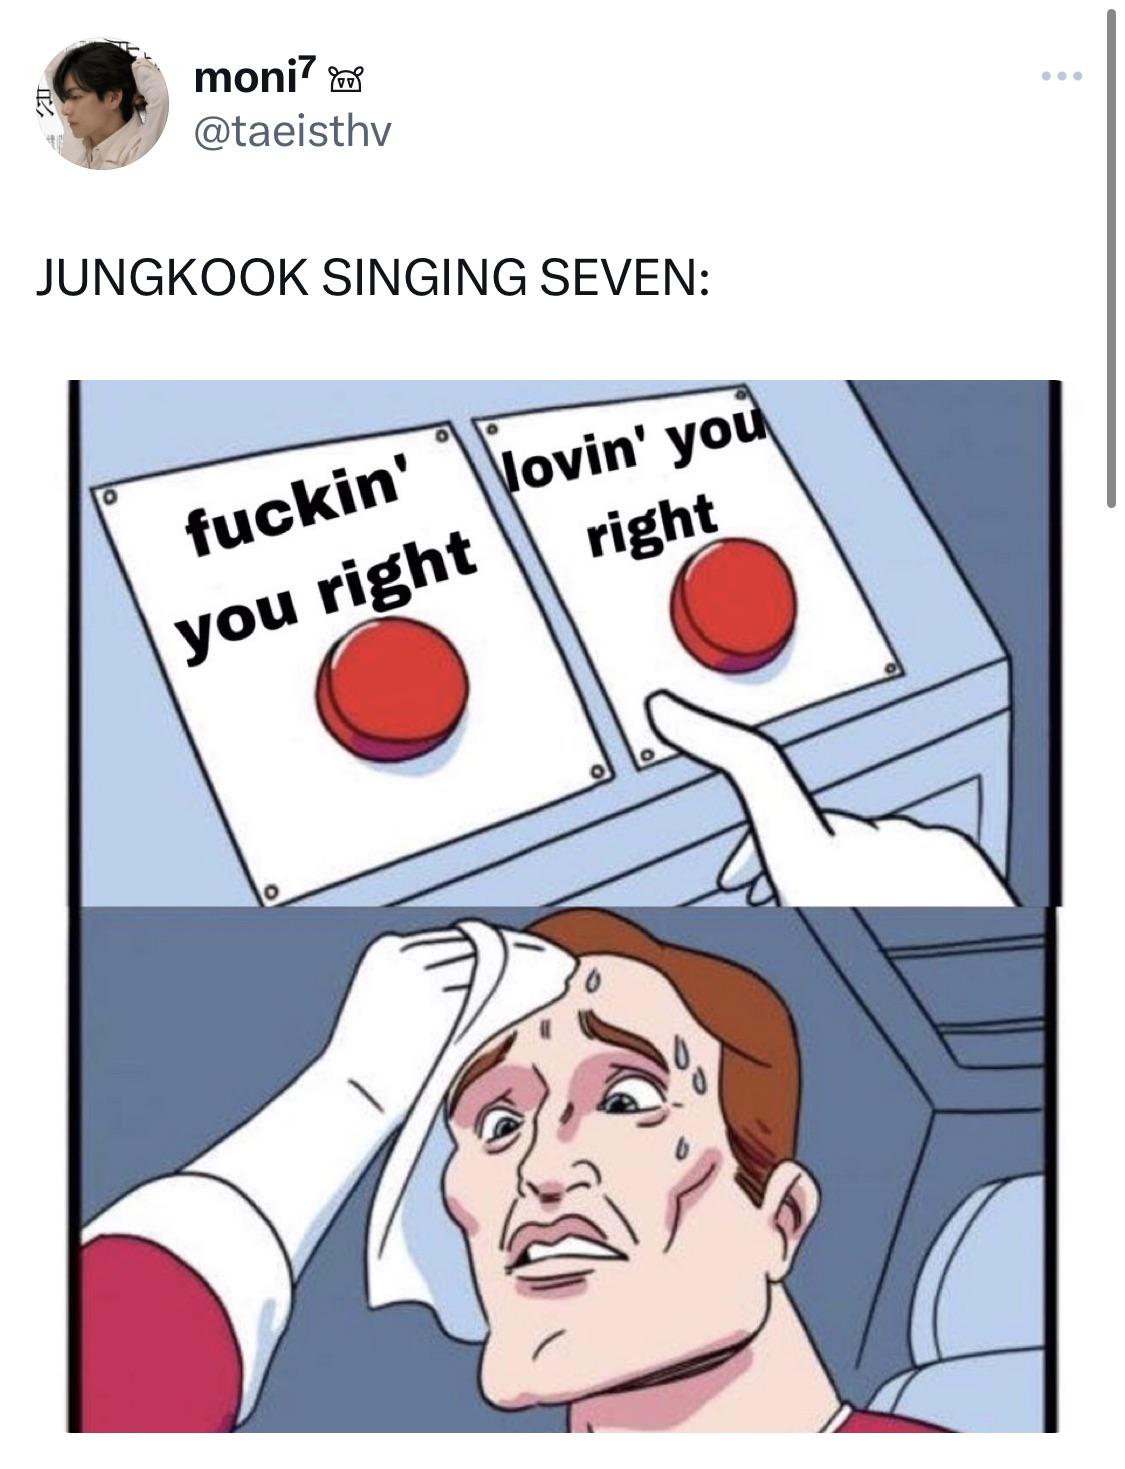 This was Jungkook today while singing Seven on Weverse 👀